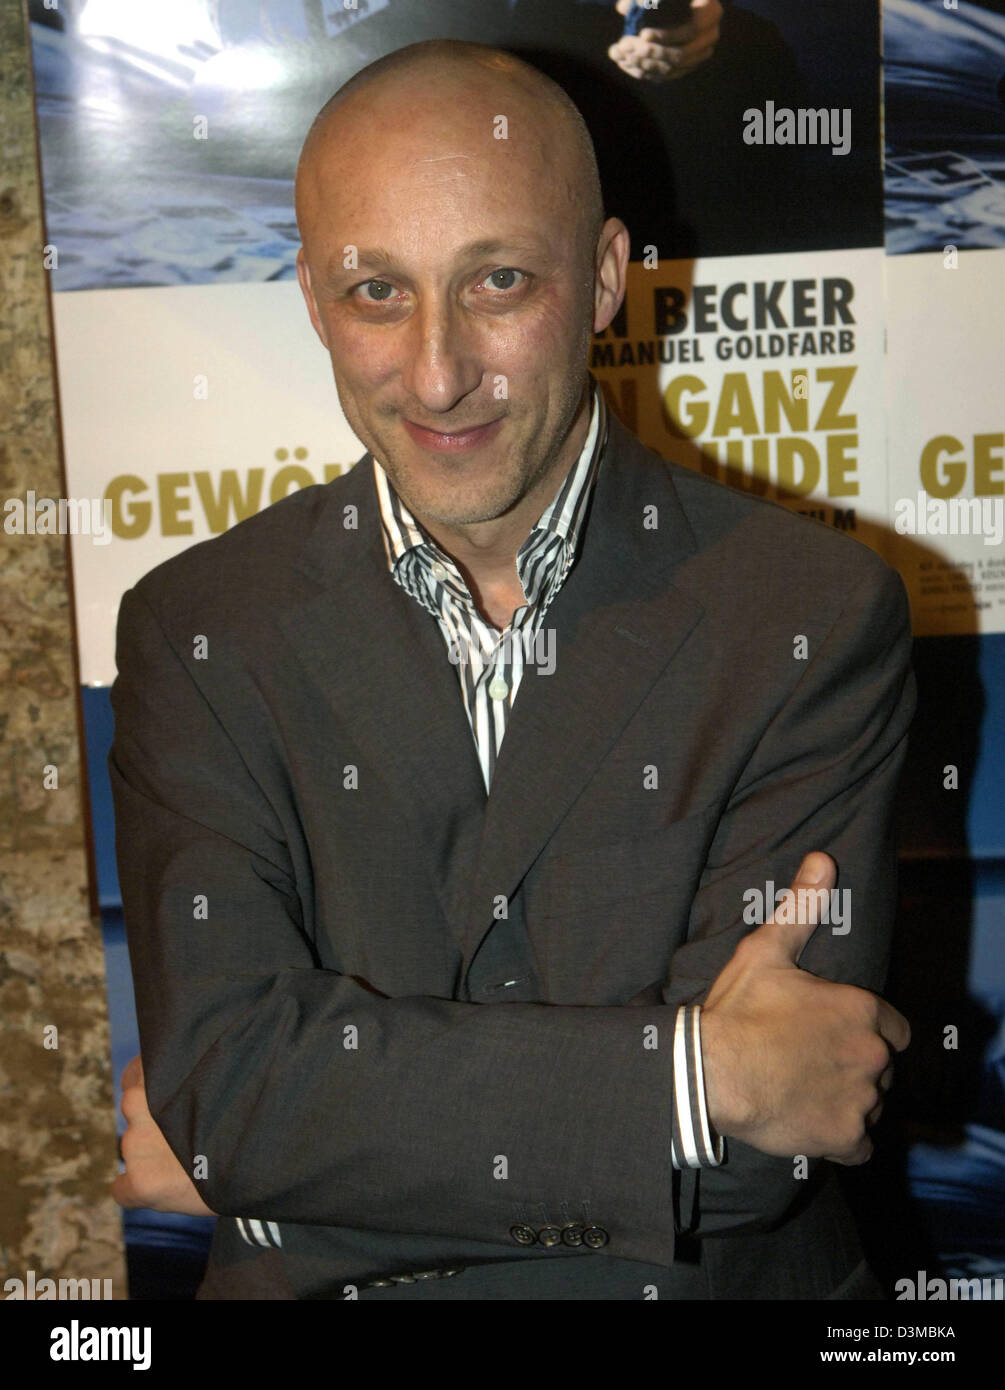 Oliver Hirschbiegel poses in front of a film poster ahead of the premiere of his new film 'Ein ganz gewoehnlicher Jude' (a totally common jew) in Hamburg, Germany, Thursday, 19 January 2006. The film, based on the novel of the same name by Swiss author Charles Lewinsky, deals with the story of Emanuel Goldfarb, a Jew who is invited by a school class to talk about is identity. His l Stock Photo